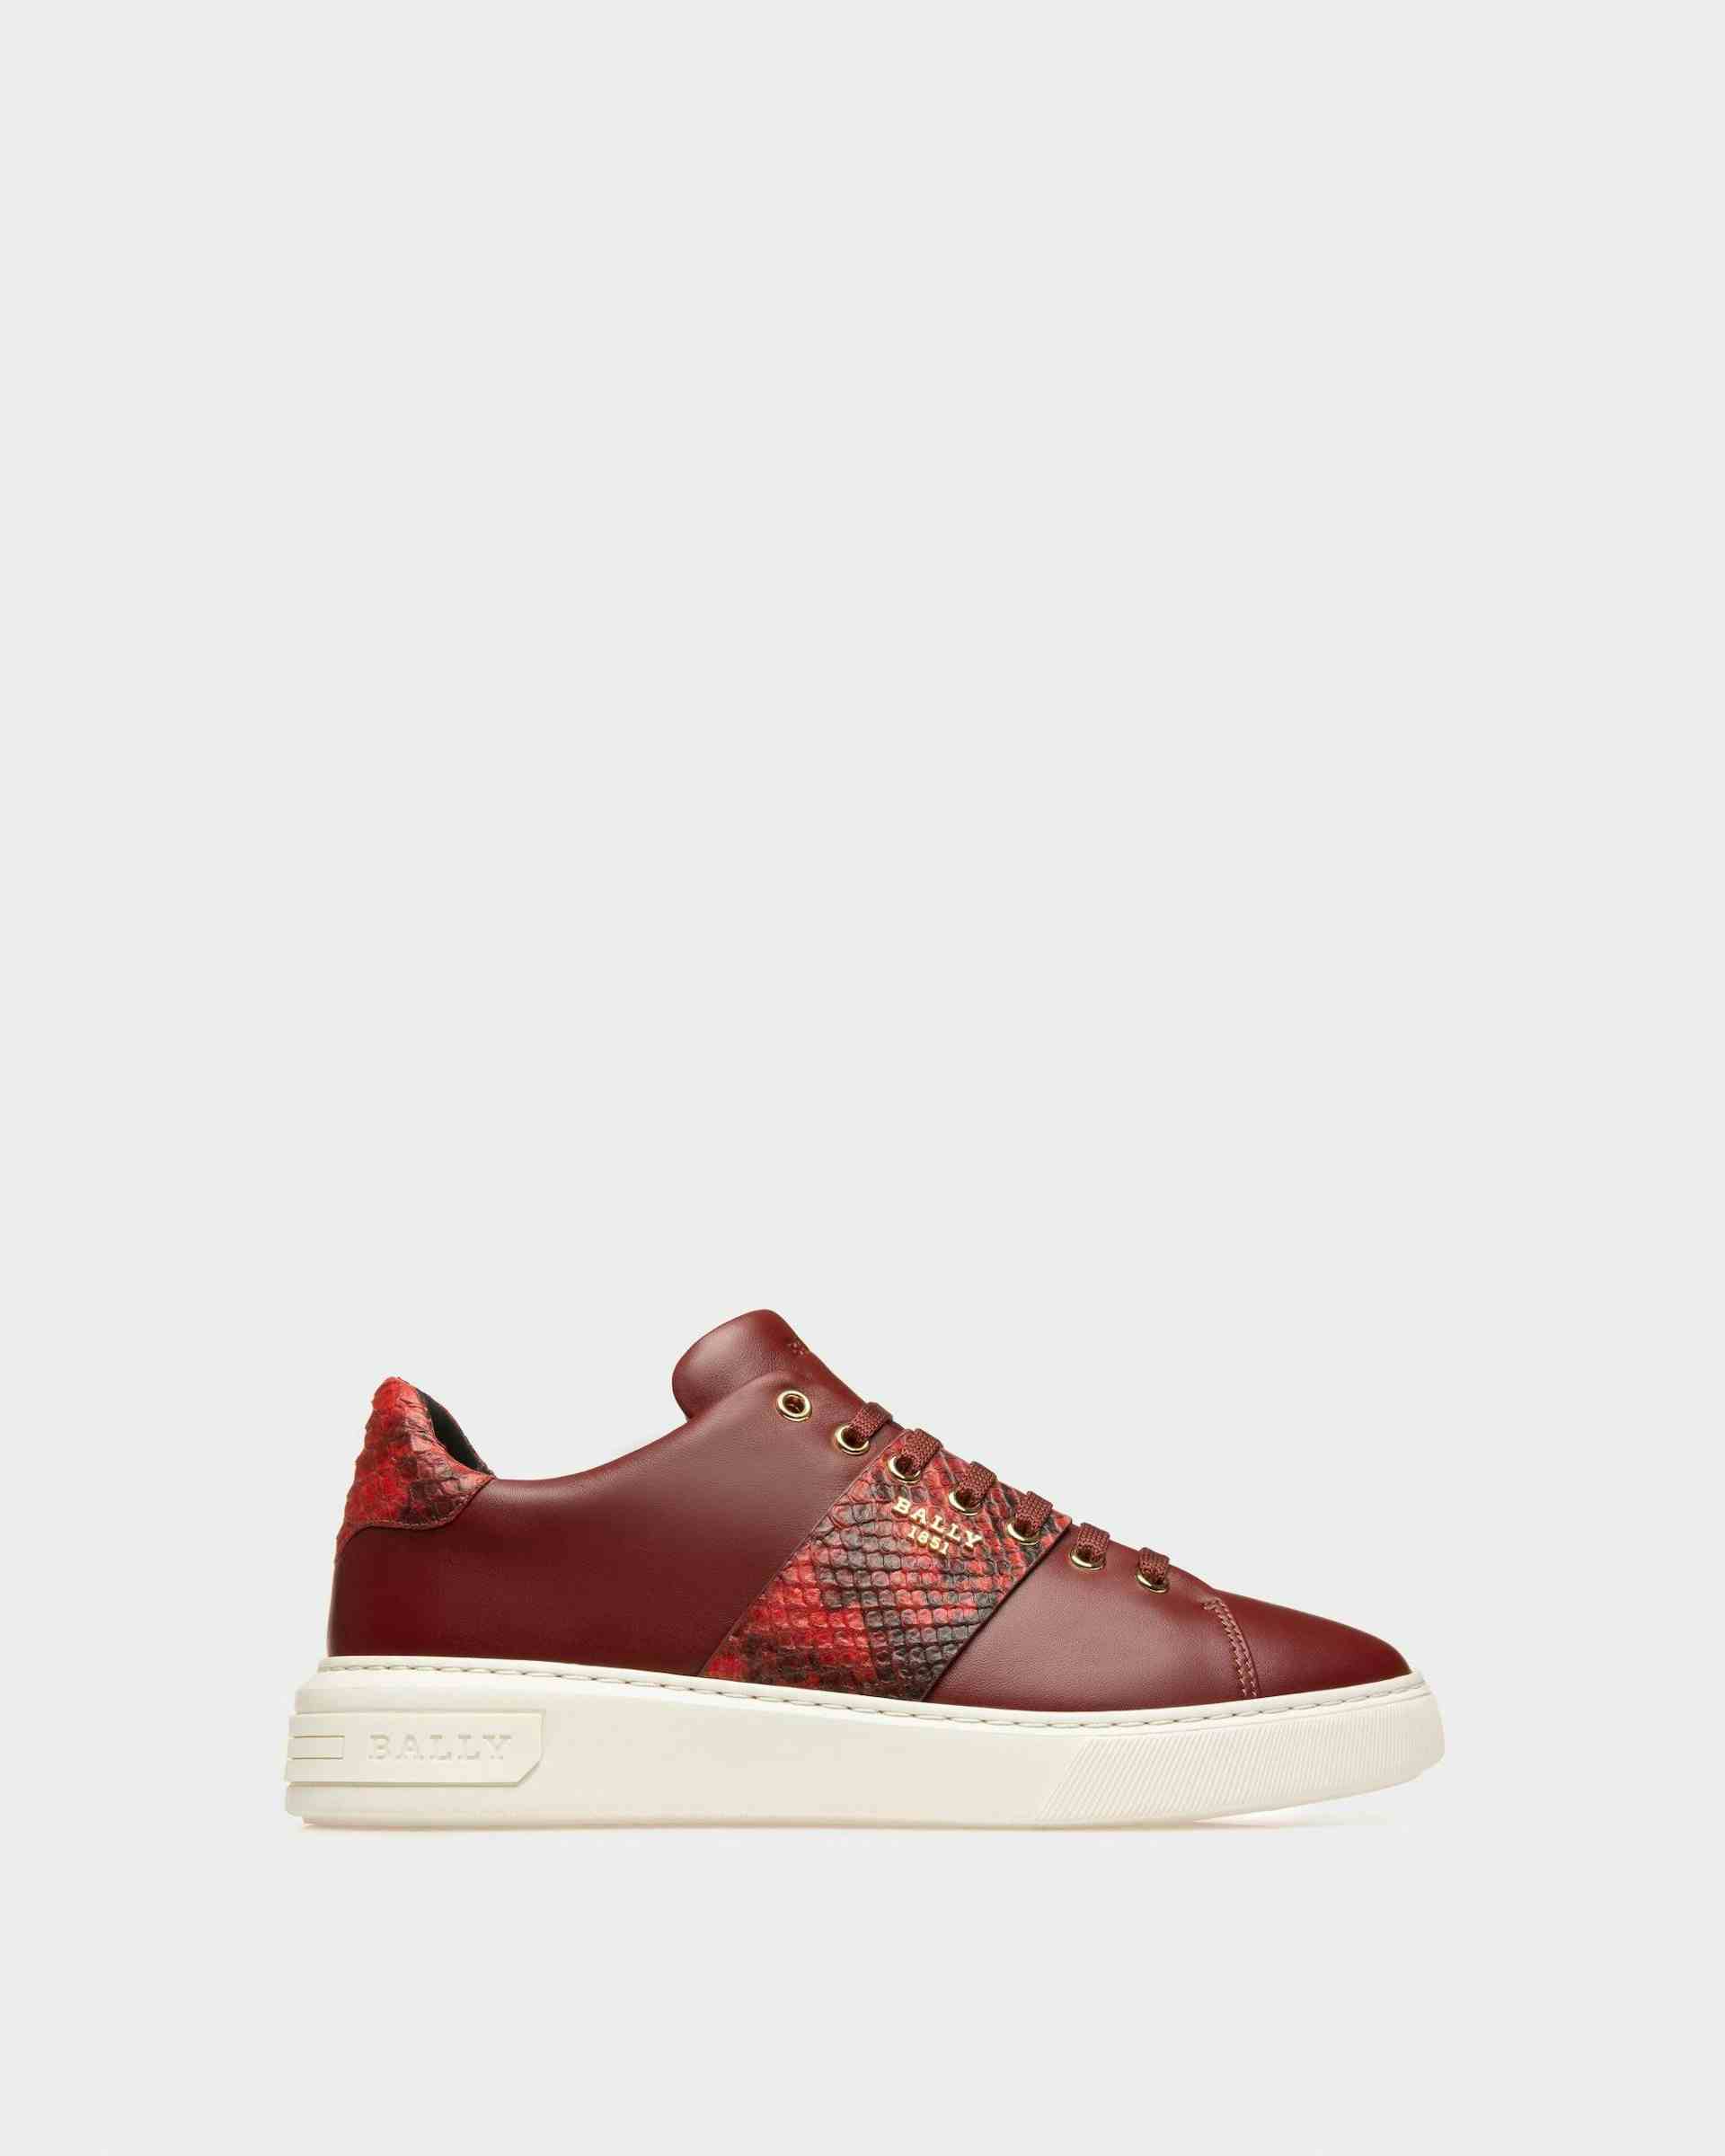 Mattye Leather Sneakers In Heritage Red - Men's - Bally